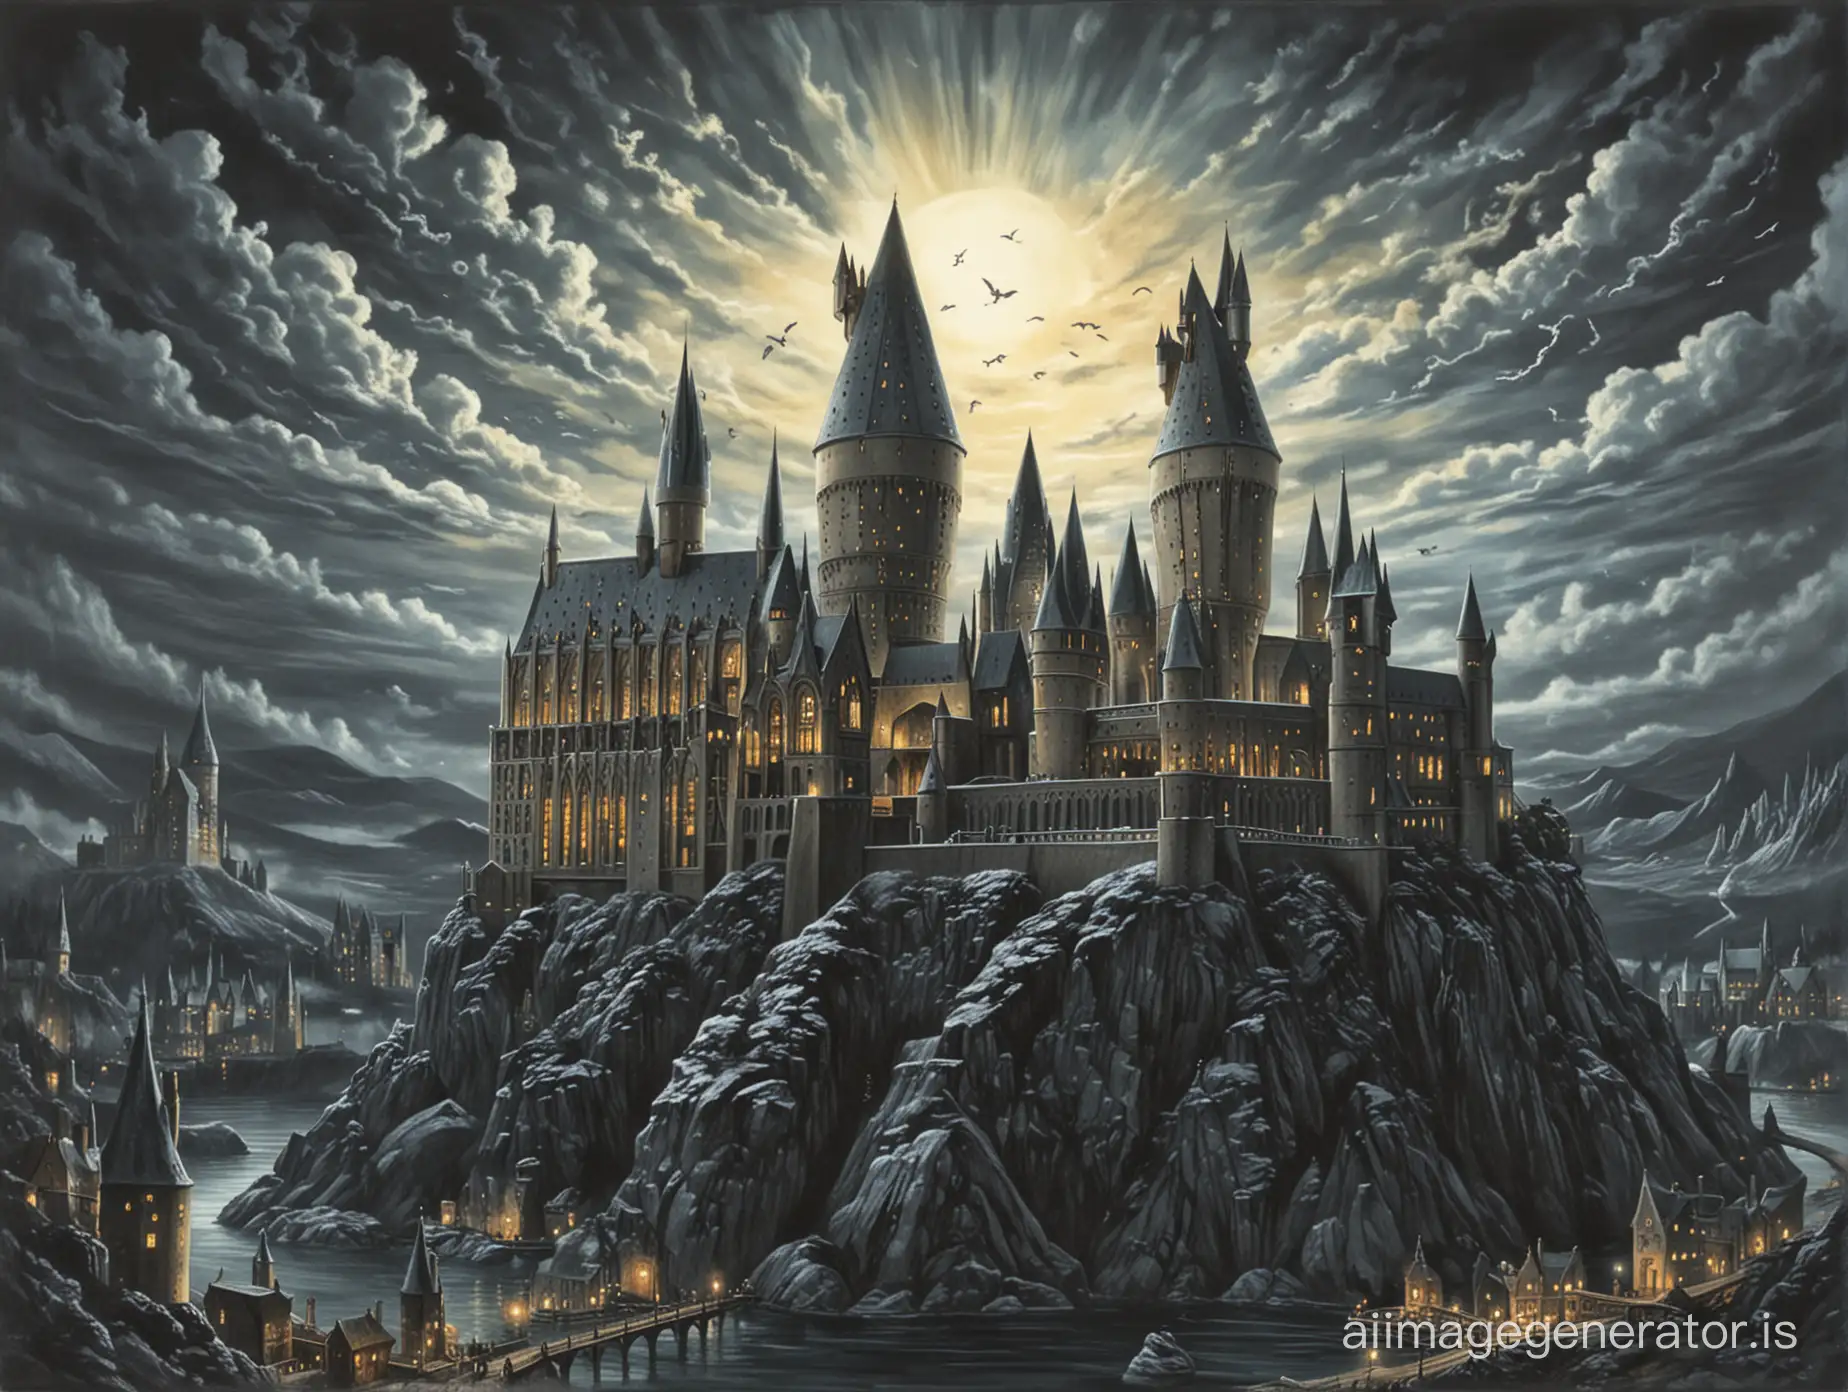 draw a picture of Hogwarts from Harry Potter